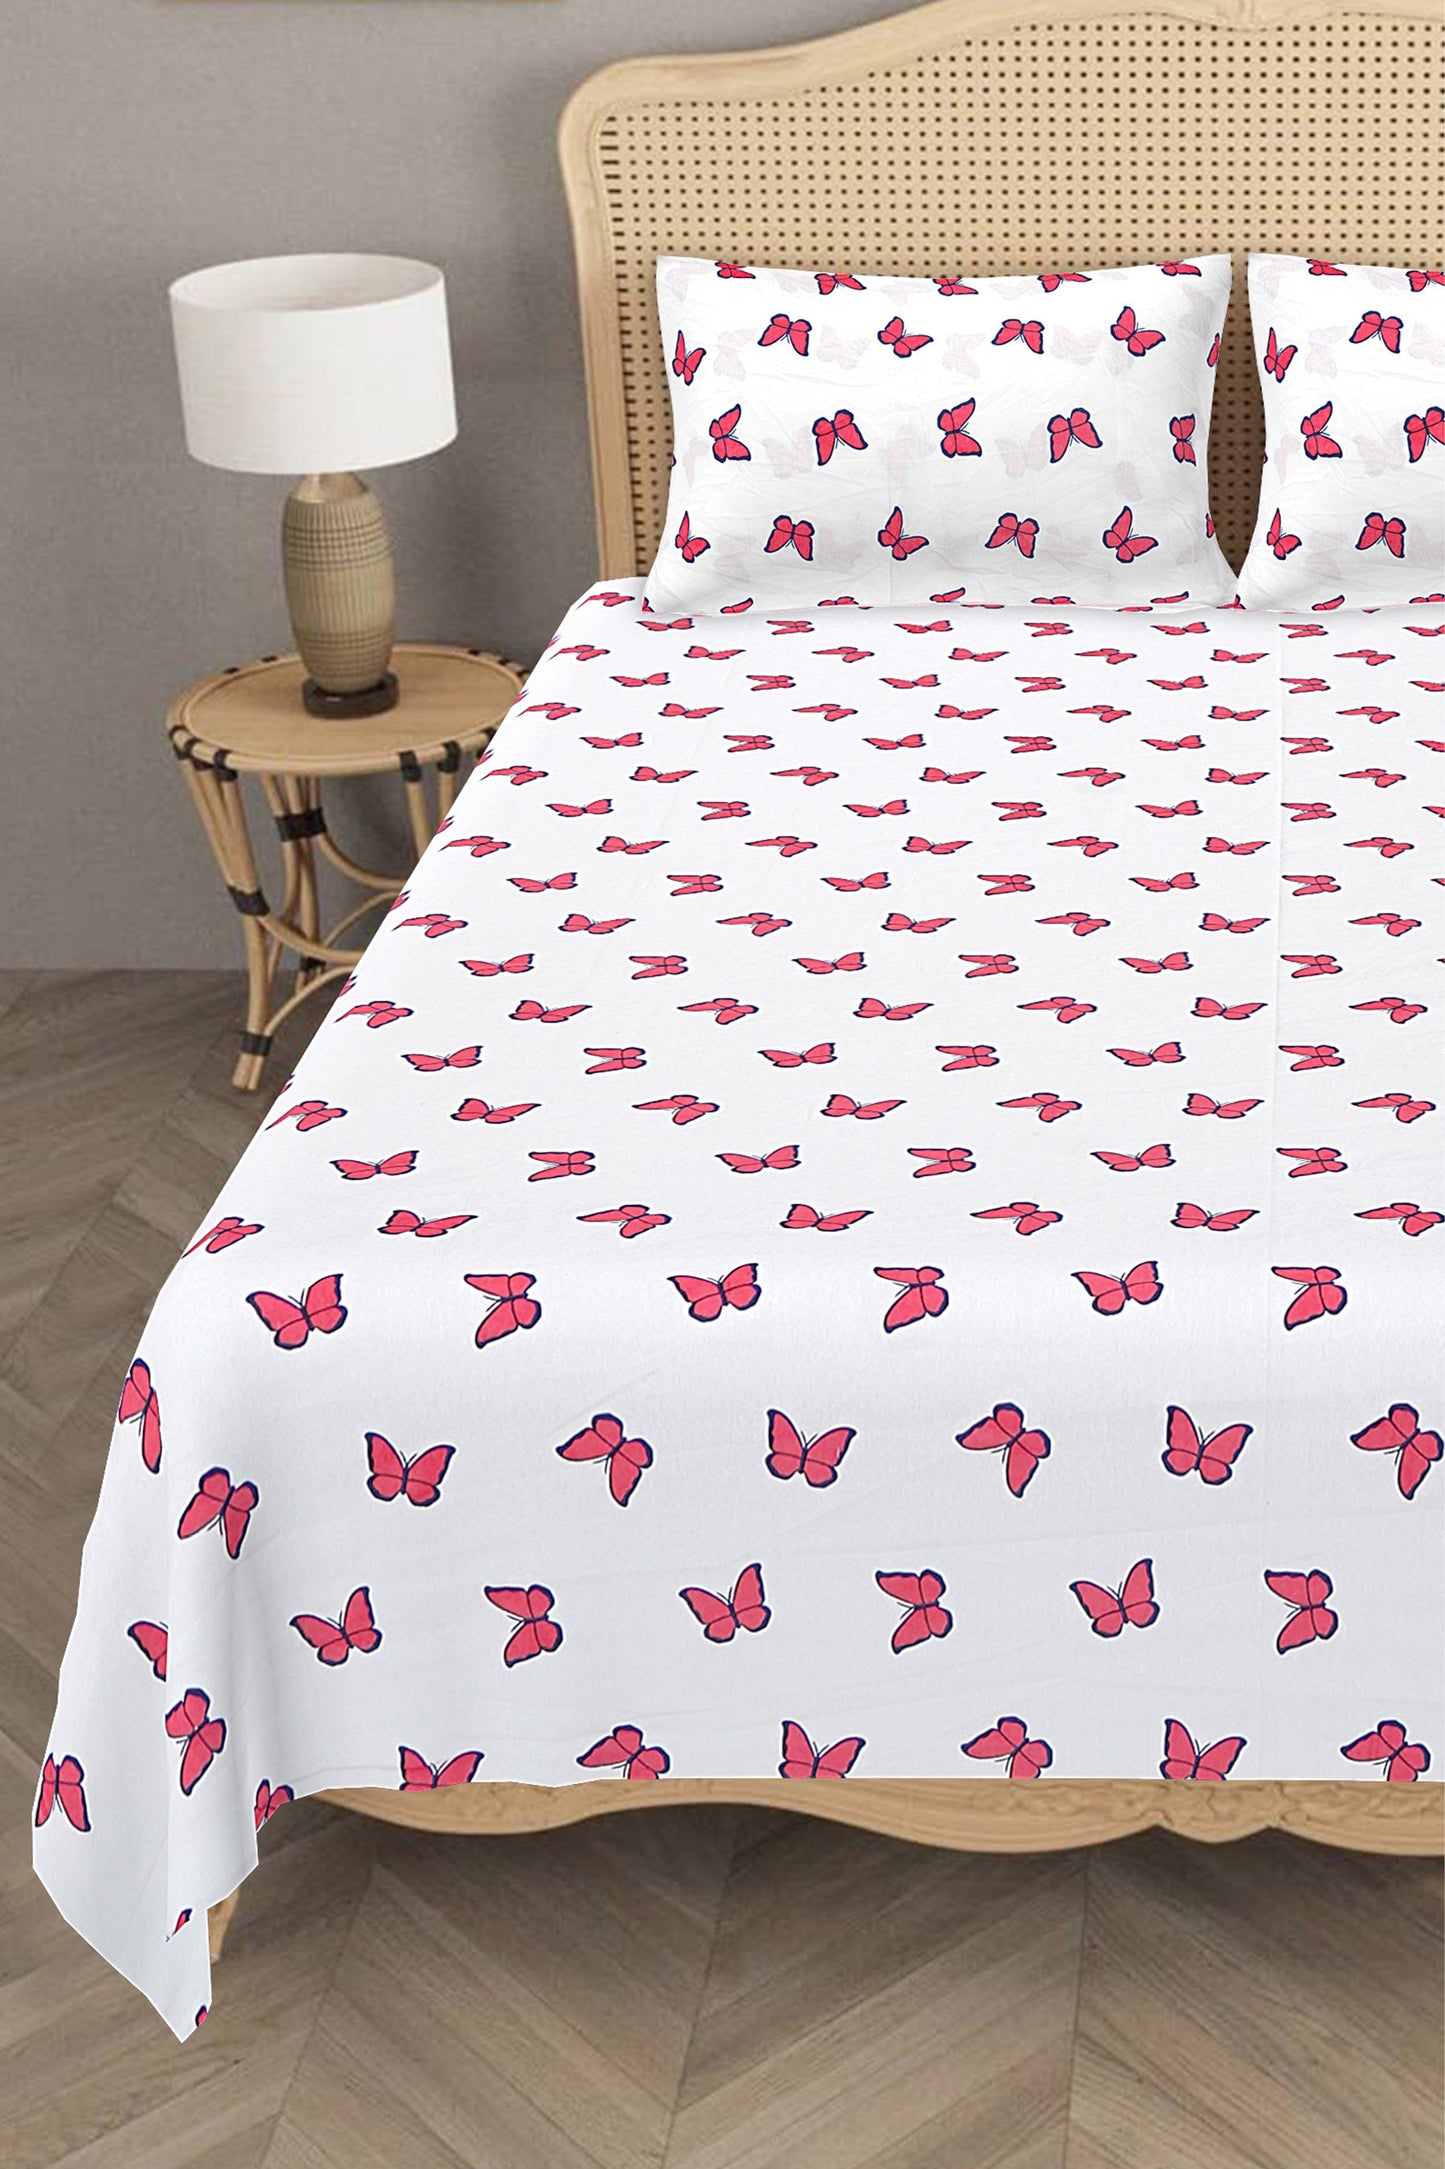 Kids Cotton Bedroom Linens - Double Sheet with 2 Pillow Covers in Red Butterfly Print - King Size Bed